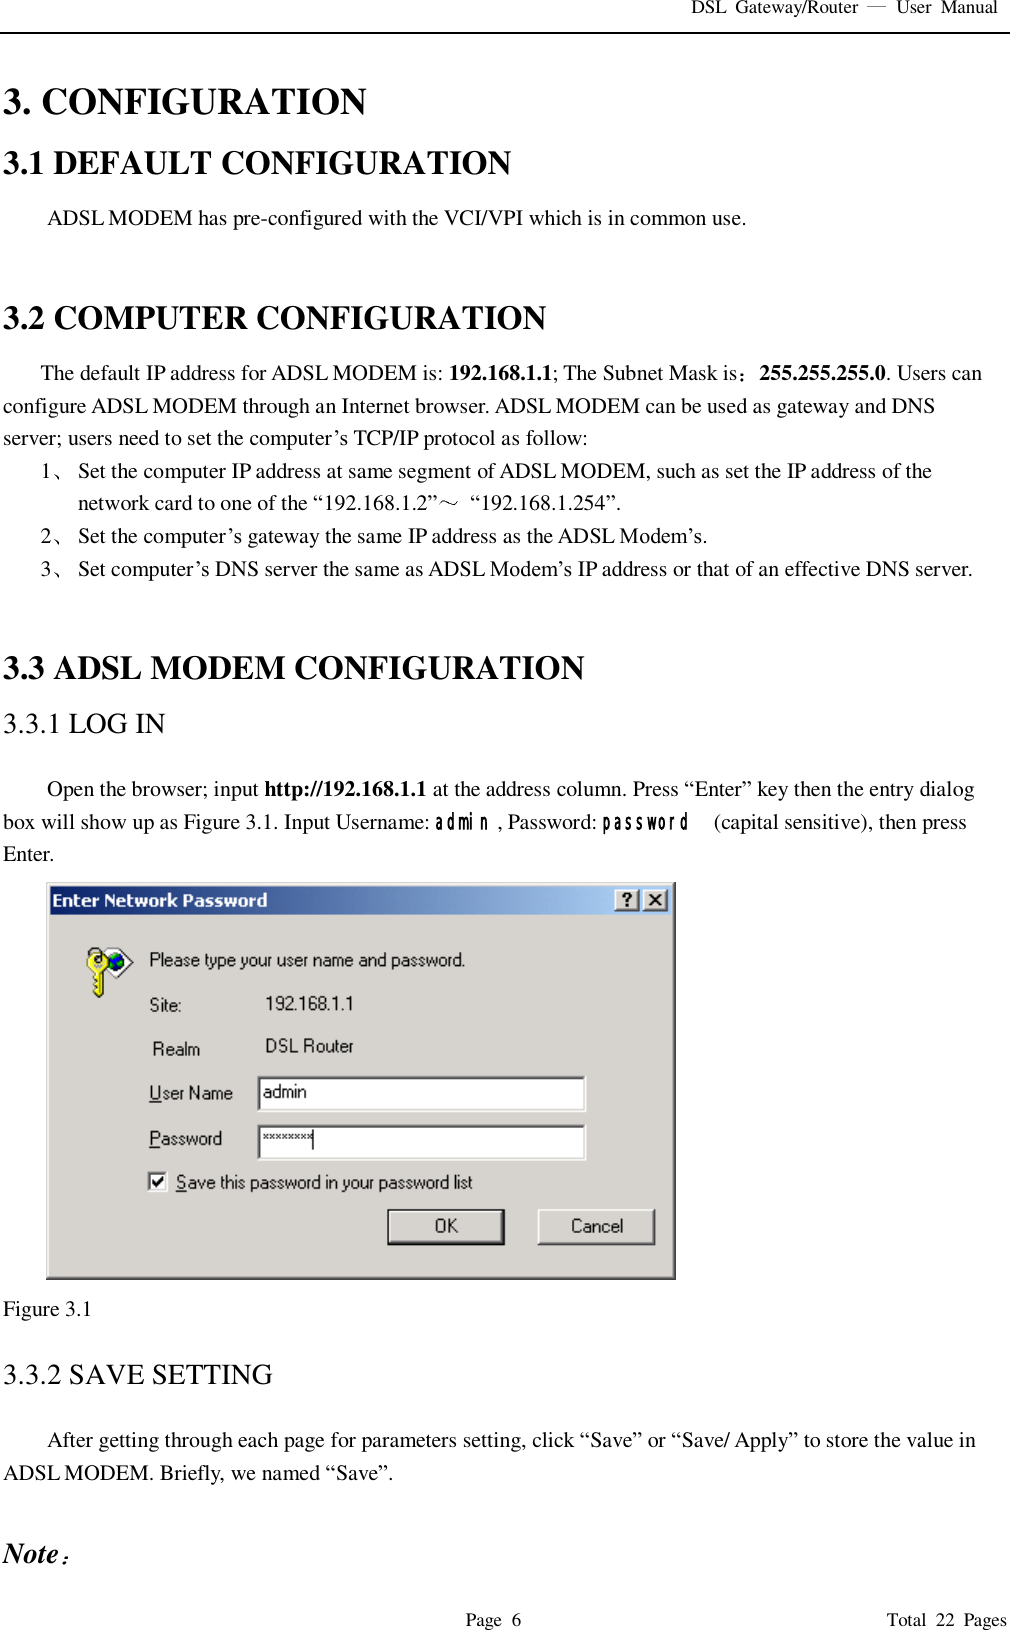 DSL  Gateway/Router    User  Manual   Page  6                                                                              Total  22  Pages 3. CONFIGURATION 3.1 DEFAULT CONFIGURATION ADSL MODEM has pre-configured with the VCI/VPI which is in common use.     3.2 COMPUTER CONFIGURATION The default IP address for ADSL MODEM is: 192.168.1.1; The Subnet Mask is 255.255.255.0. Users can configure ADSL MODEM through an Internet browser. ADSL MODEM can be used as gateway and DNS server; users need to set the computer’s TCP/IP protocol as follow: 1 Set the computer IP address at same segment of ADSL MODEM, such as set the IP address of the network card to one of the “192.168.1.2” “192.168.1.254”. 2 Set the computer’s gateway the same IP address as the ADSL Modem’s. 3 Set computer’s DNS server the same as ADSL Modem’s IP address or that of an effective DNS server.   3.3 ADSL MODEM CONFIGURATION 3.3.1 LOG IN  Open the browser; input http://192.168.1.1 at the address column. Press “Enter” key then the entry dialog box will show up as Figure 3.1. Input Username: admin , Password: password   (capital sensitive), then press Enter.  Figure 3.1  3.3.2 SAVE SETTING  After getting through each page for parameters setting, click “Save” or “Save/ Apply” to store the value in ADSL MODEM. Briefly, we named “Save”.  Note  